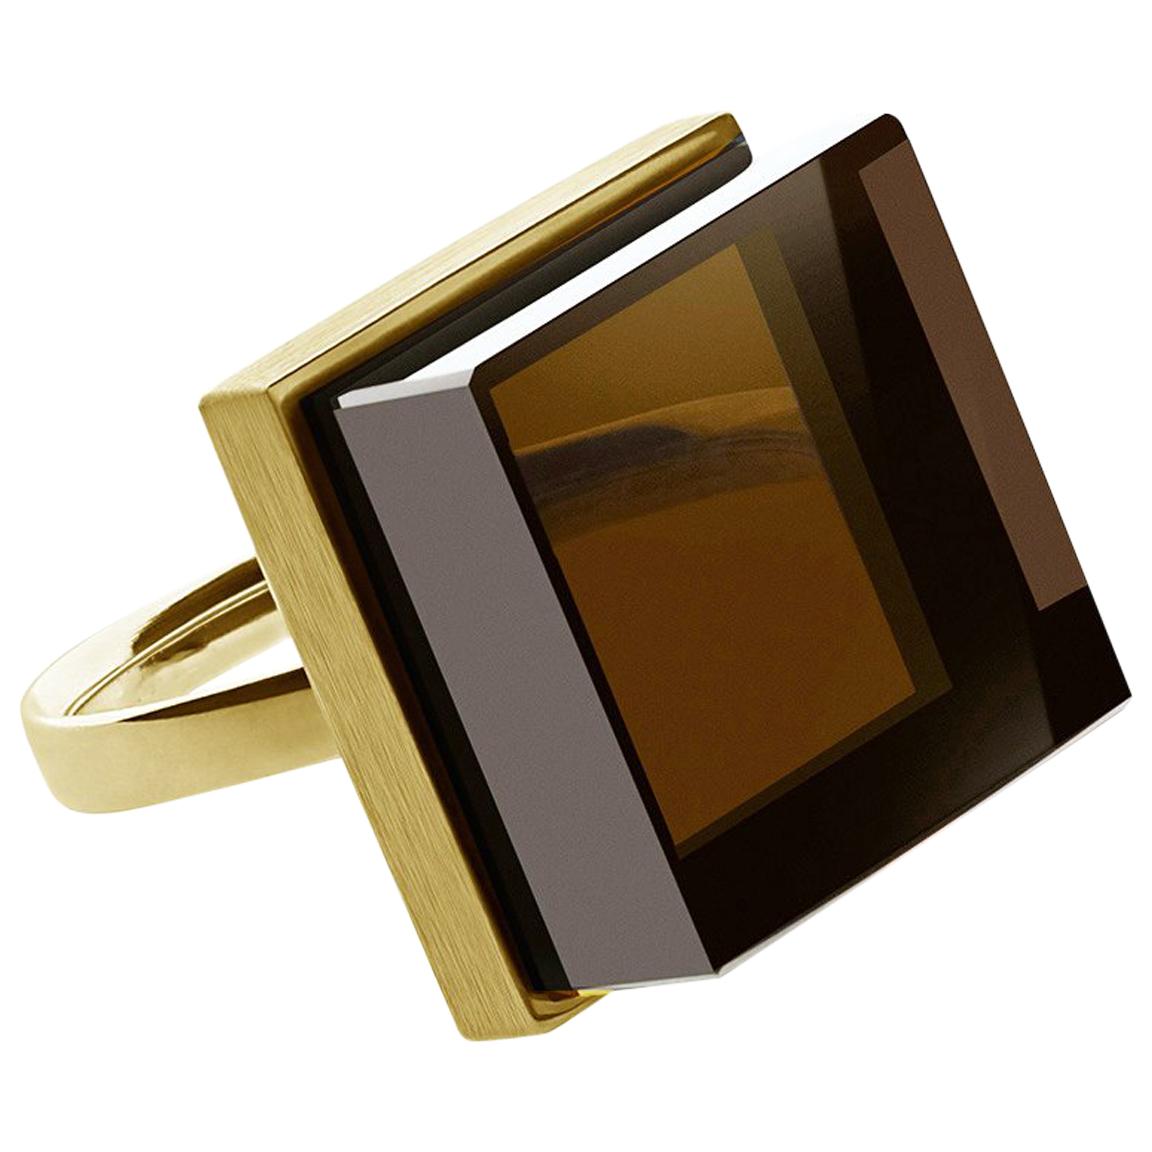 Featured in Vogue Yellow Gold Contemporary Ring with Smoky Quartz 